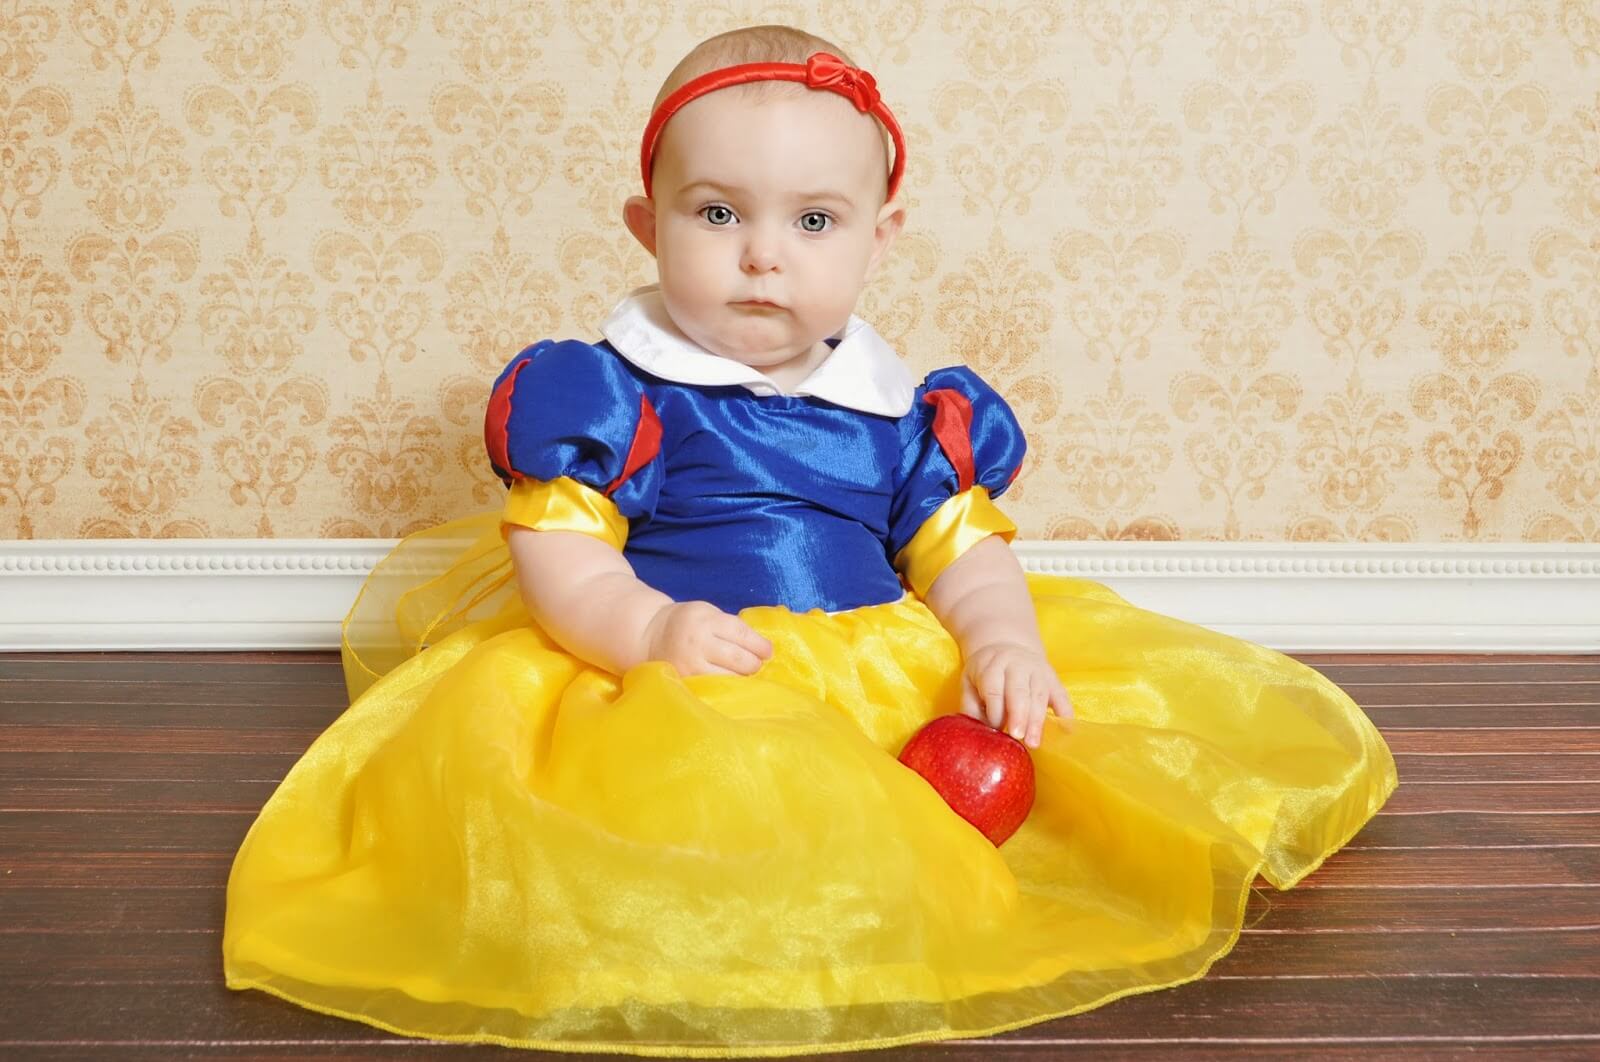 Pretty Snow White-Themed Dress For Toddlers